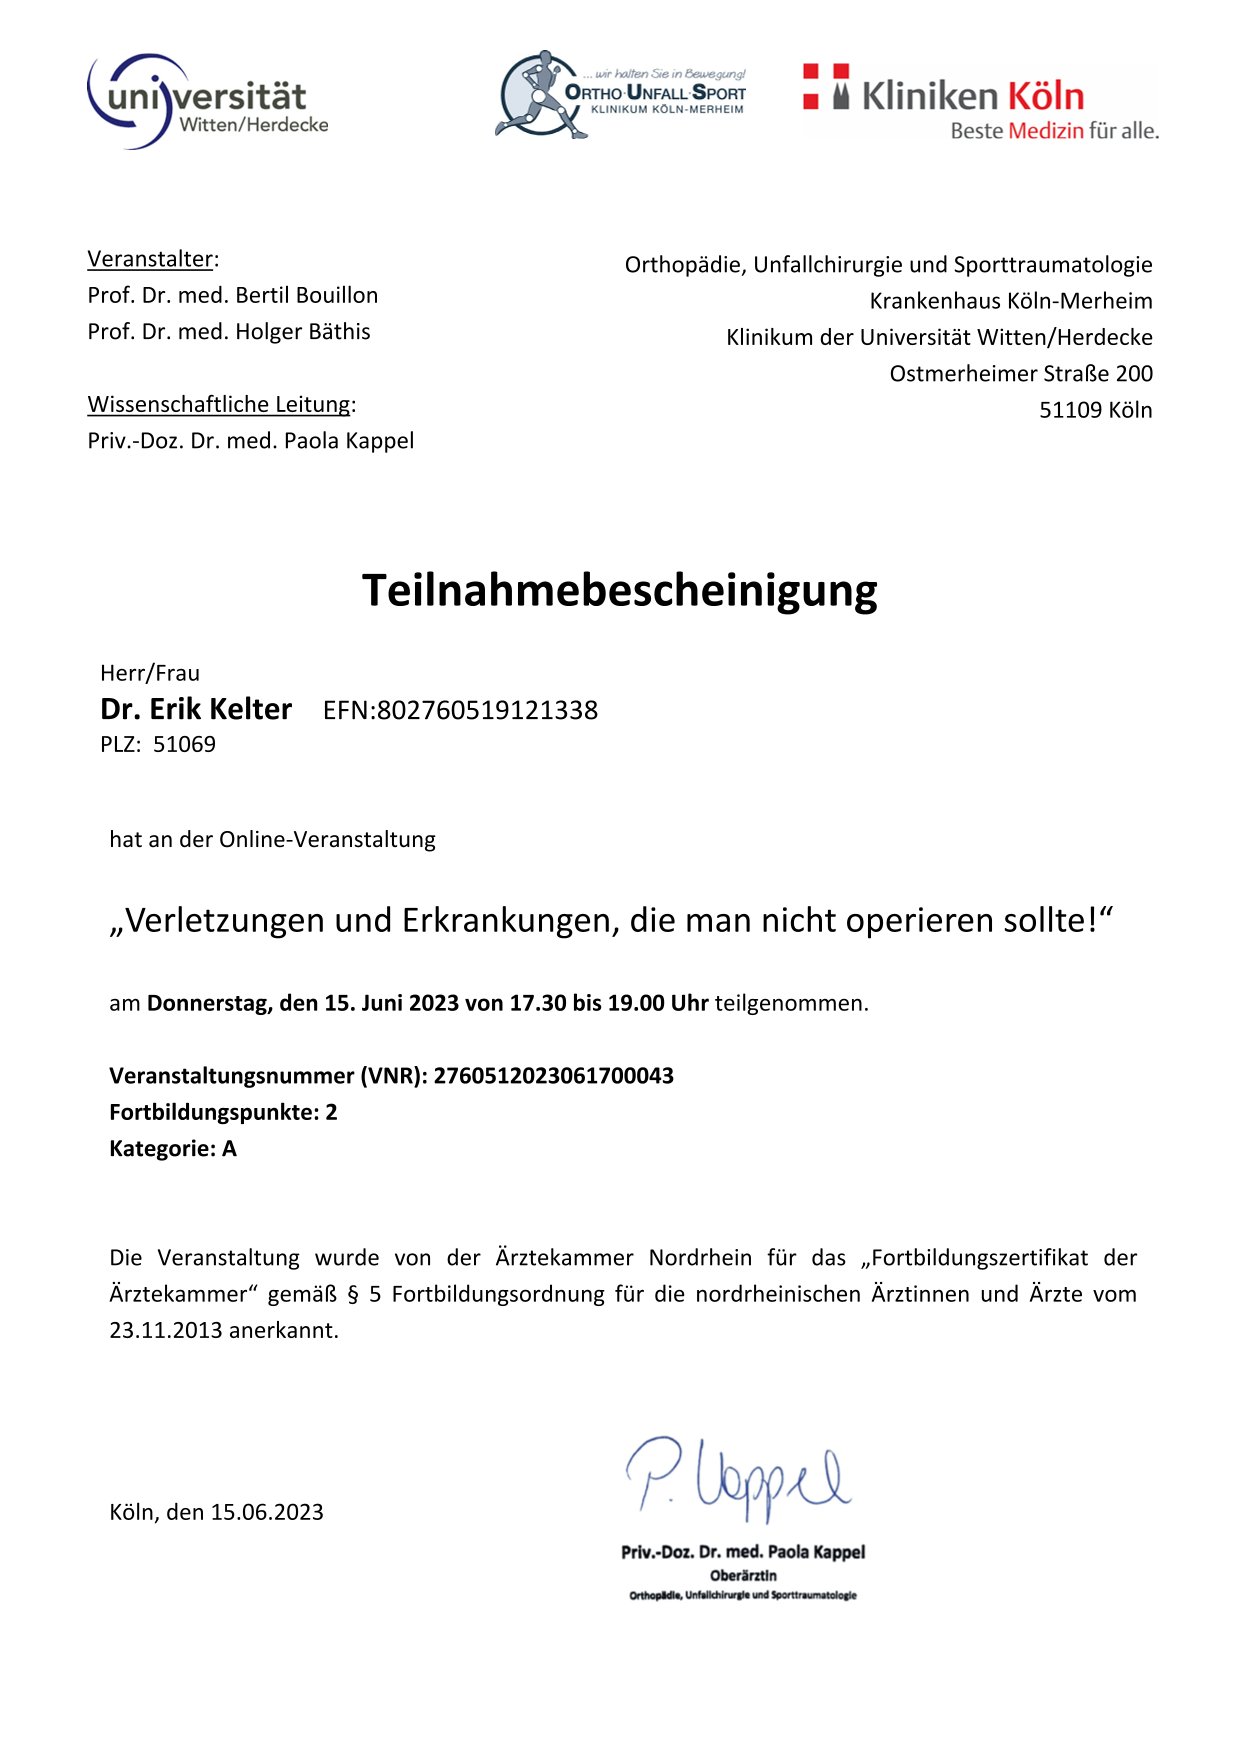 PDFMailer111-